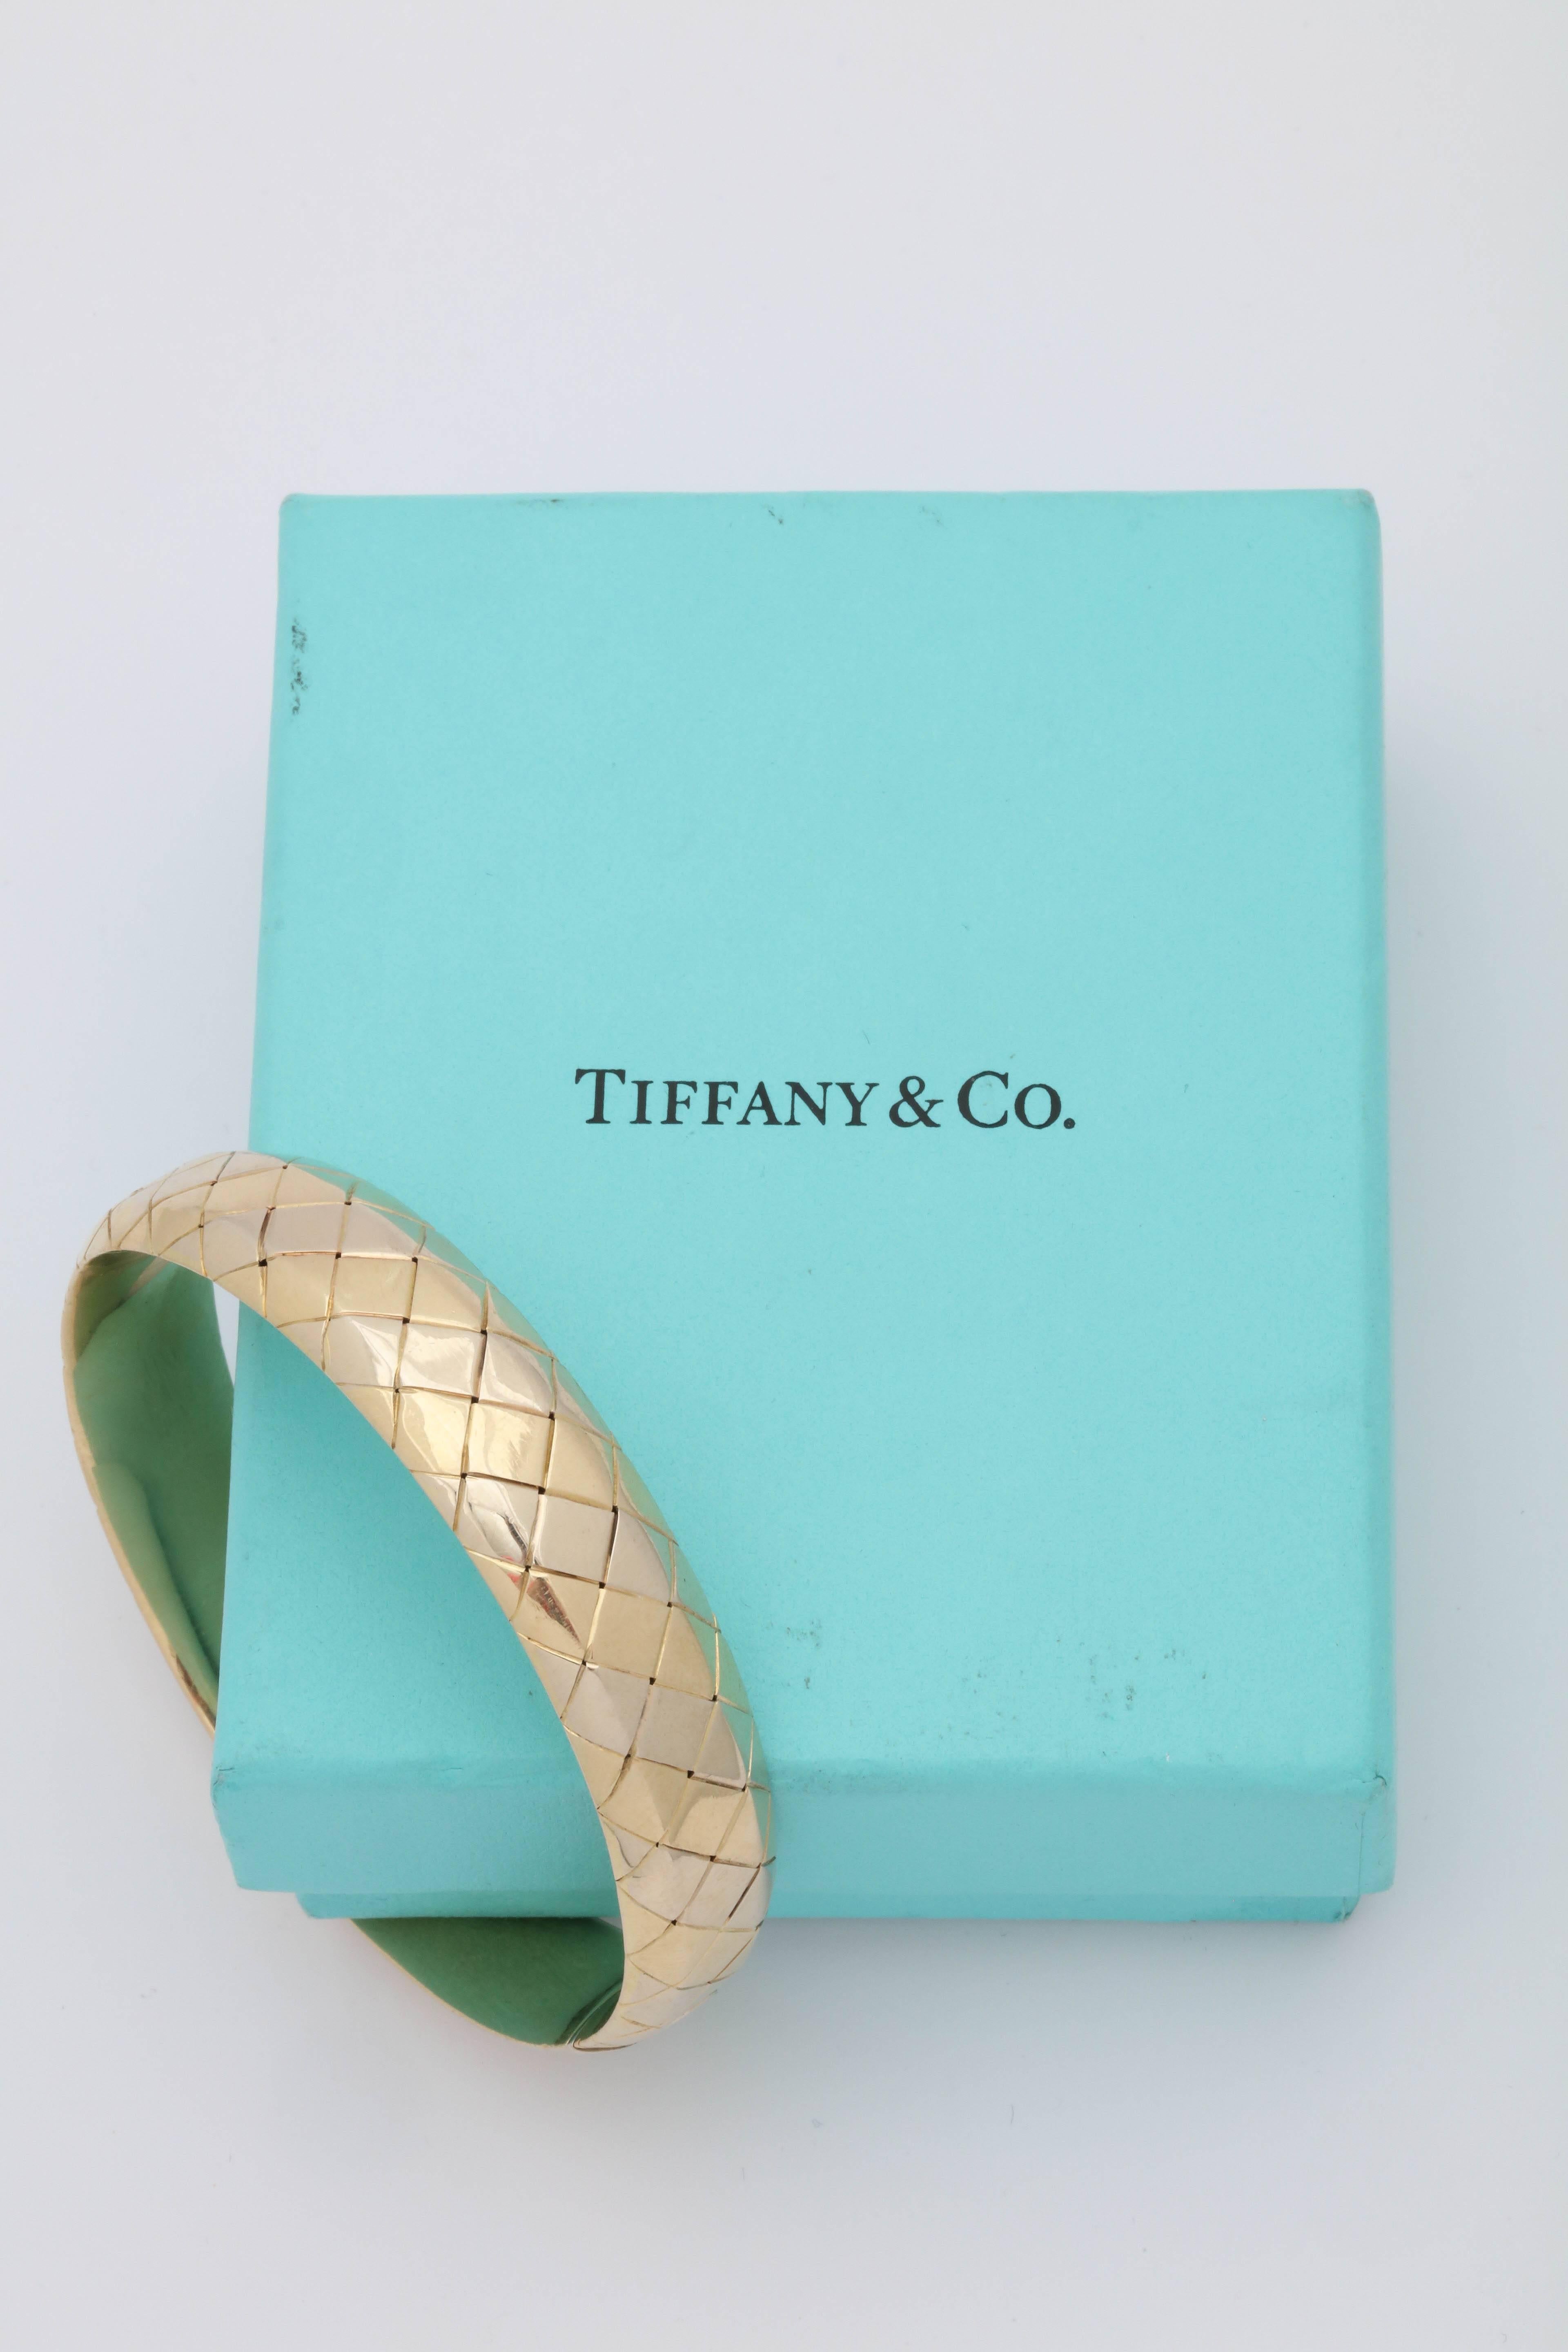 One Ladies Quilted Basket Weave Pattern With Invisible Easy Fastening And Closure Lock. Created In 18kt Yellow Gold This Bangle Bracelet Is Easily Worn With Any Attire. Made By Tiffany& Co. Italy And Created In The 1980's.